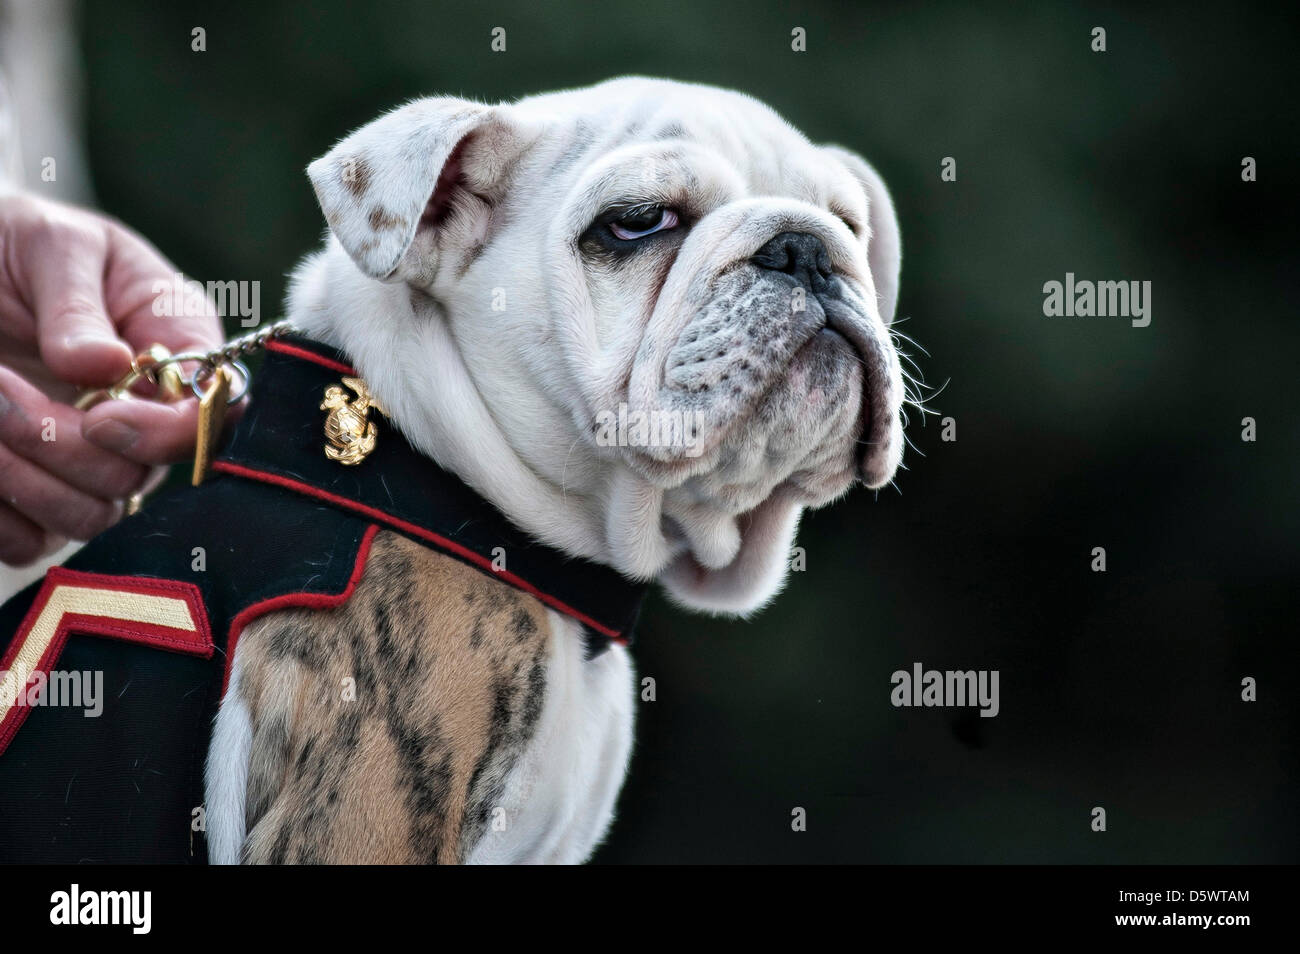 Pfc. Chesty XIV, official mascot of the Marine Corps in-training, at the conclusion of his eagle, globe and anchor emblem presentation ceremony at the Marine Barracks  in Washington, DC. The ceremony marked the conclusion of Chesty XIV's recruit training and basic indoctrination into the Corps. In the upcoming months, the young Marine will serve in a mascot-apprentice roll for the remainder of the summer working alongside his predecessor and mentor Sgt. Chesty XIII until the sergeant's retirement which is expected in late August. Stock Photo